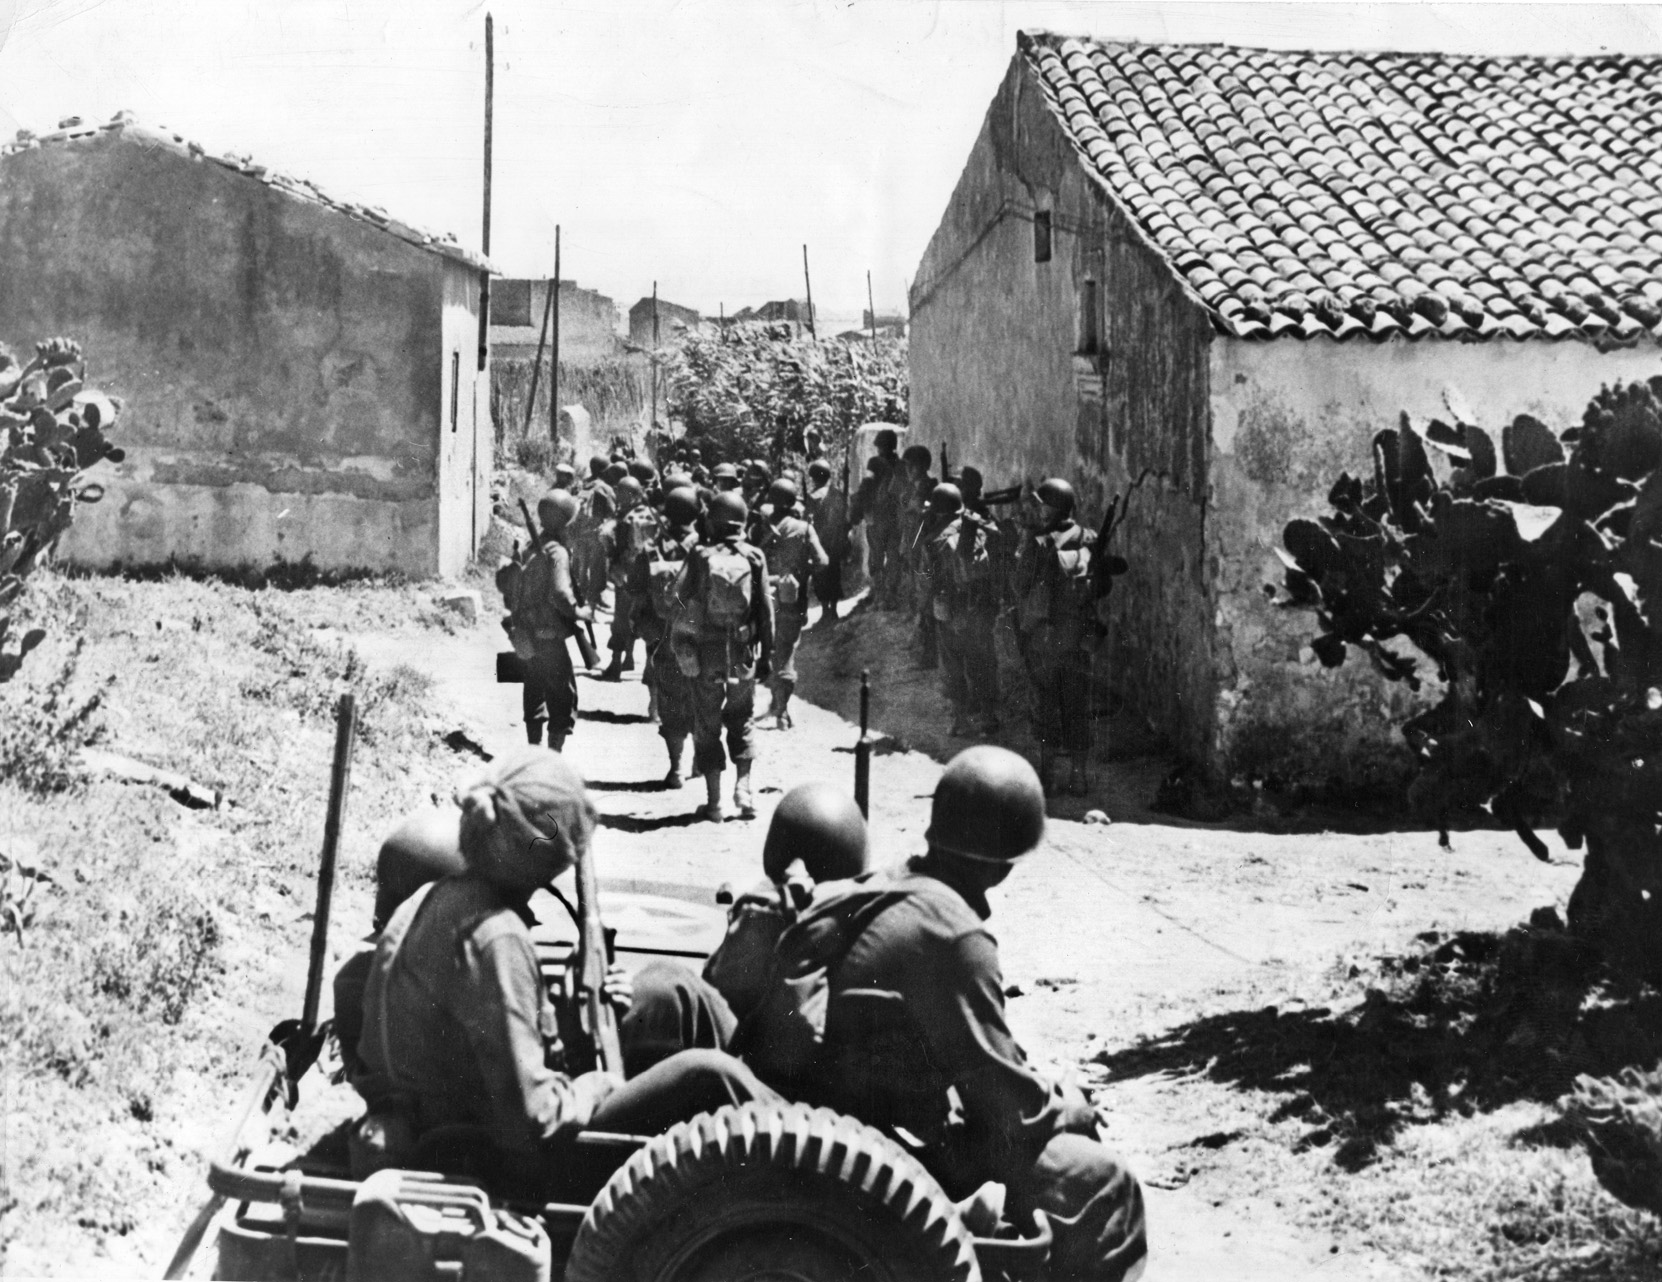 Members of the U.S. 45th Infantry Division march into the town of Scoglitti on their way to the northern coast.